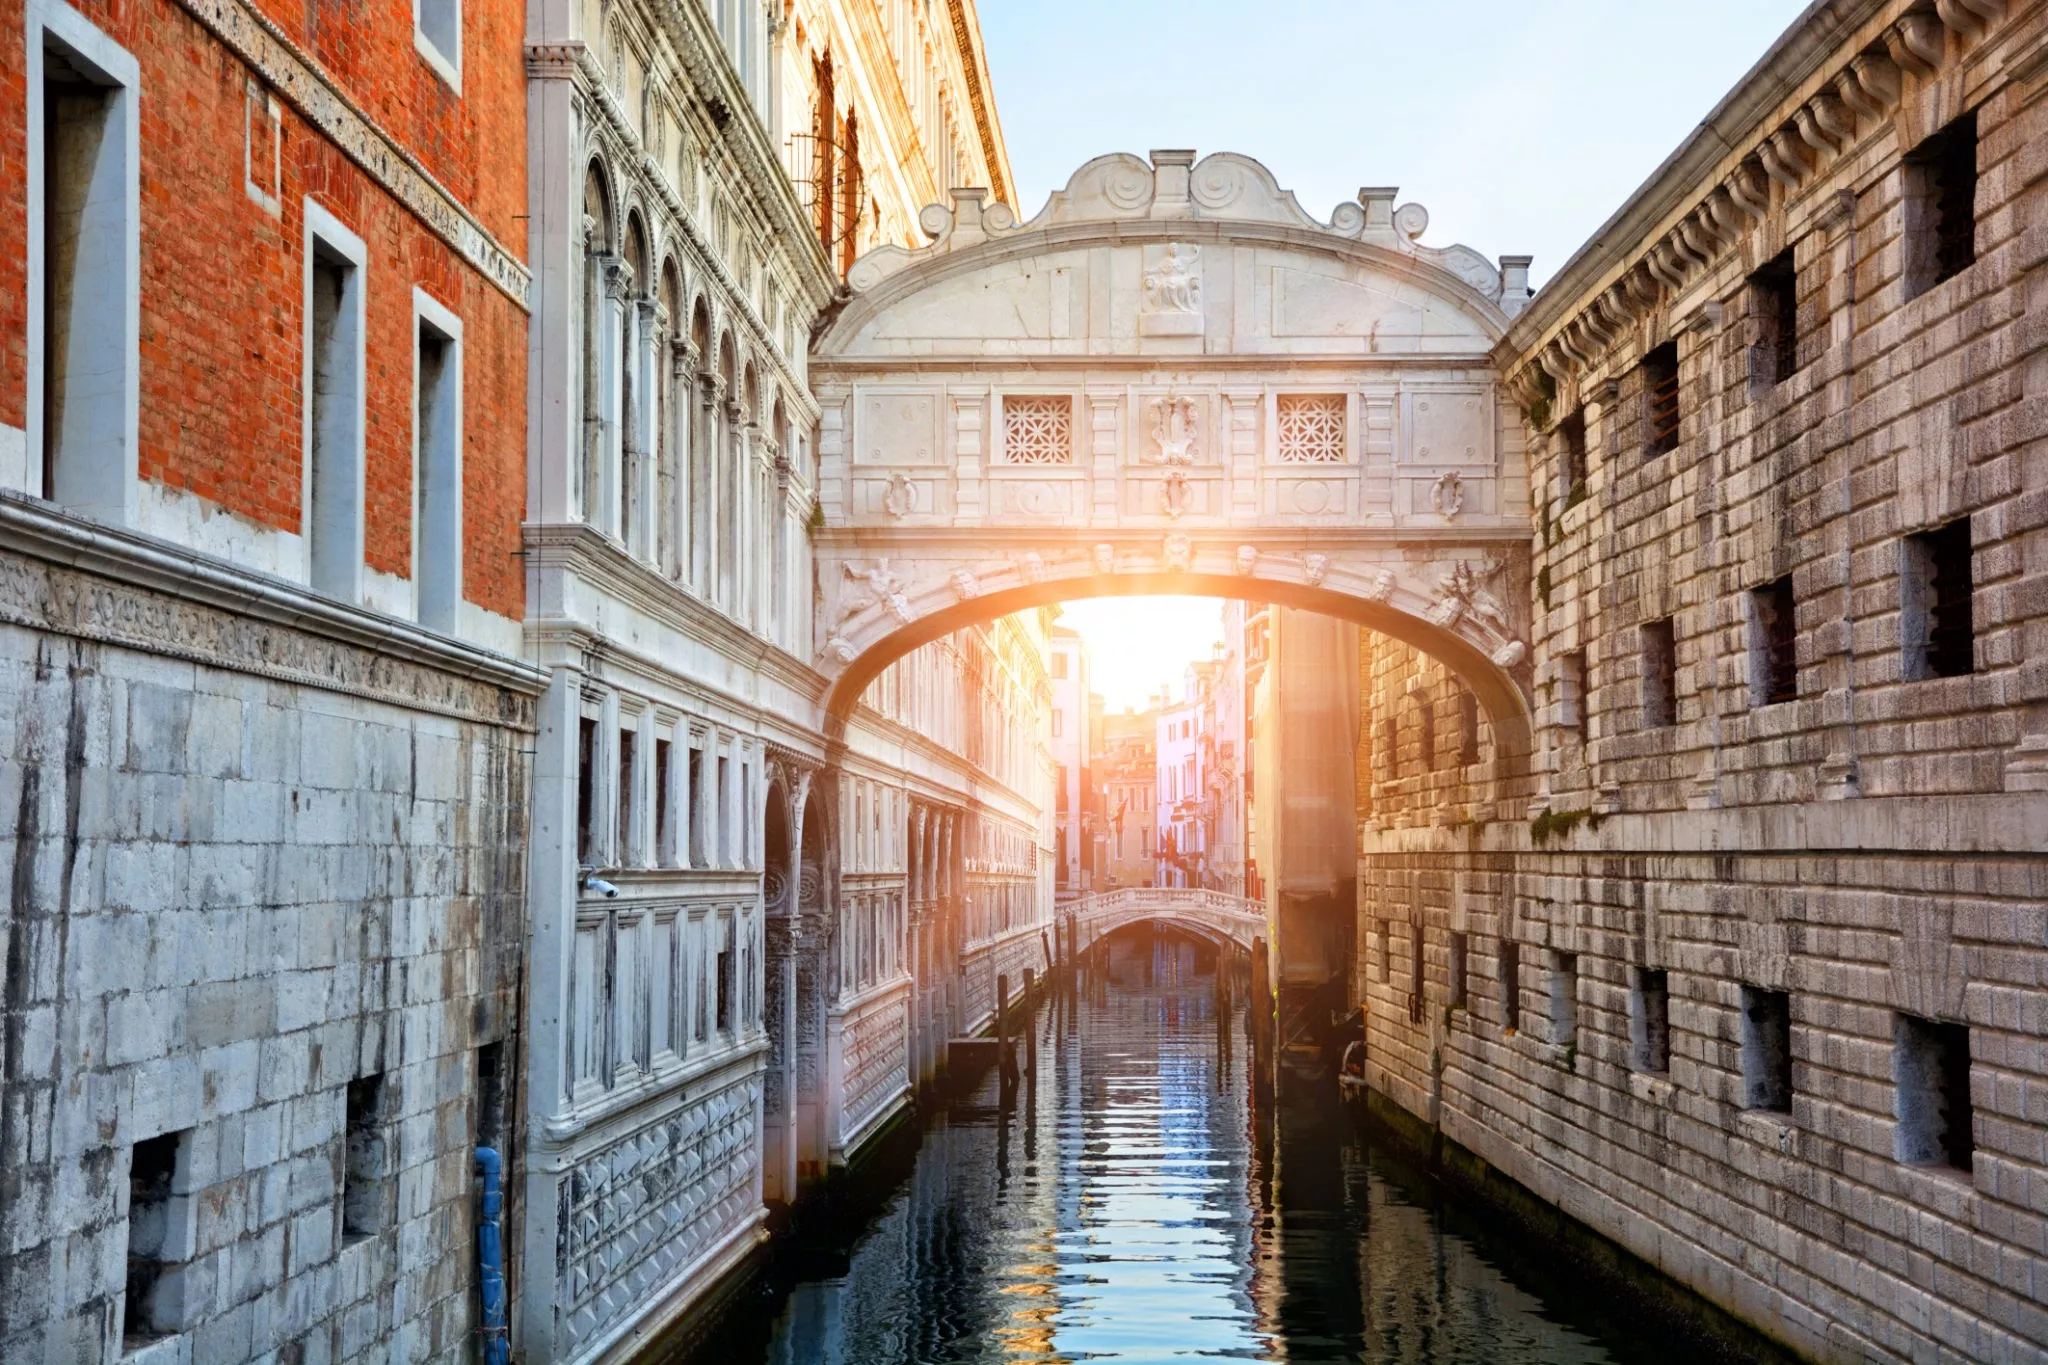 Bridge of Sighs in Italy, Europe | Architecture - Rated 4